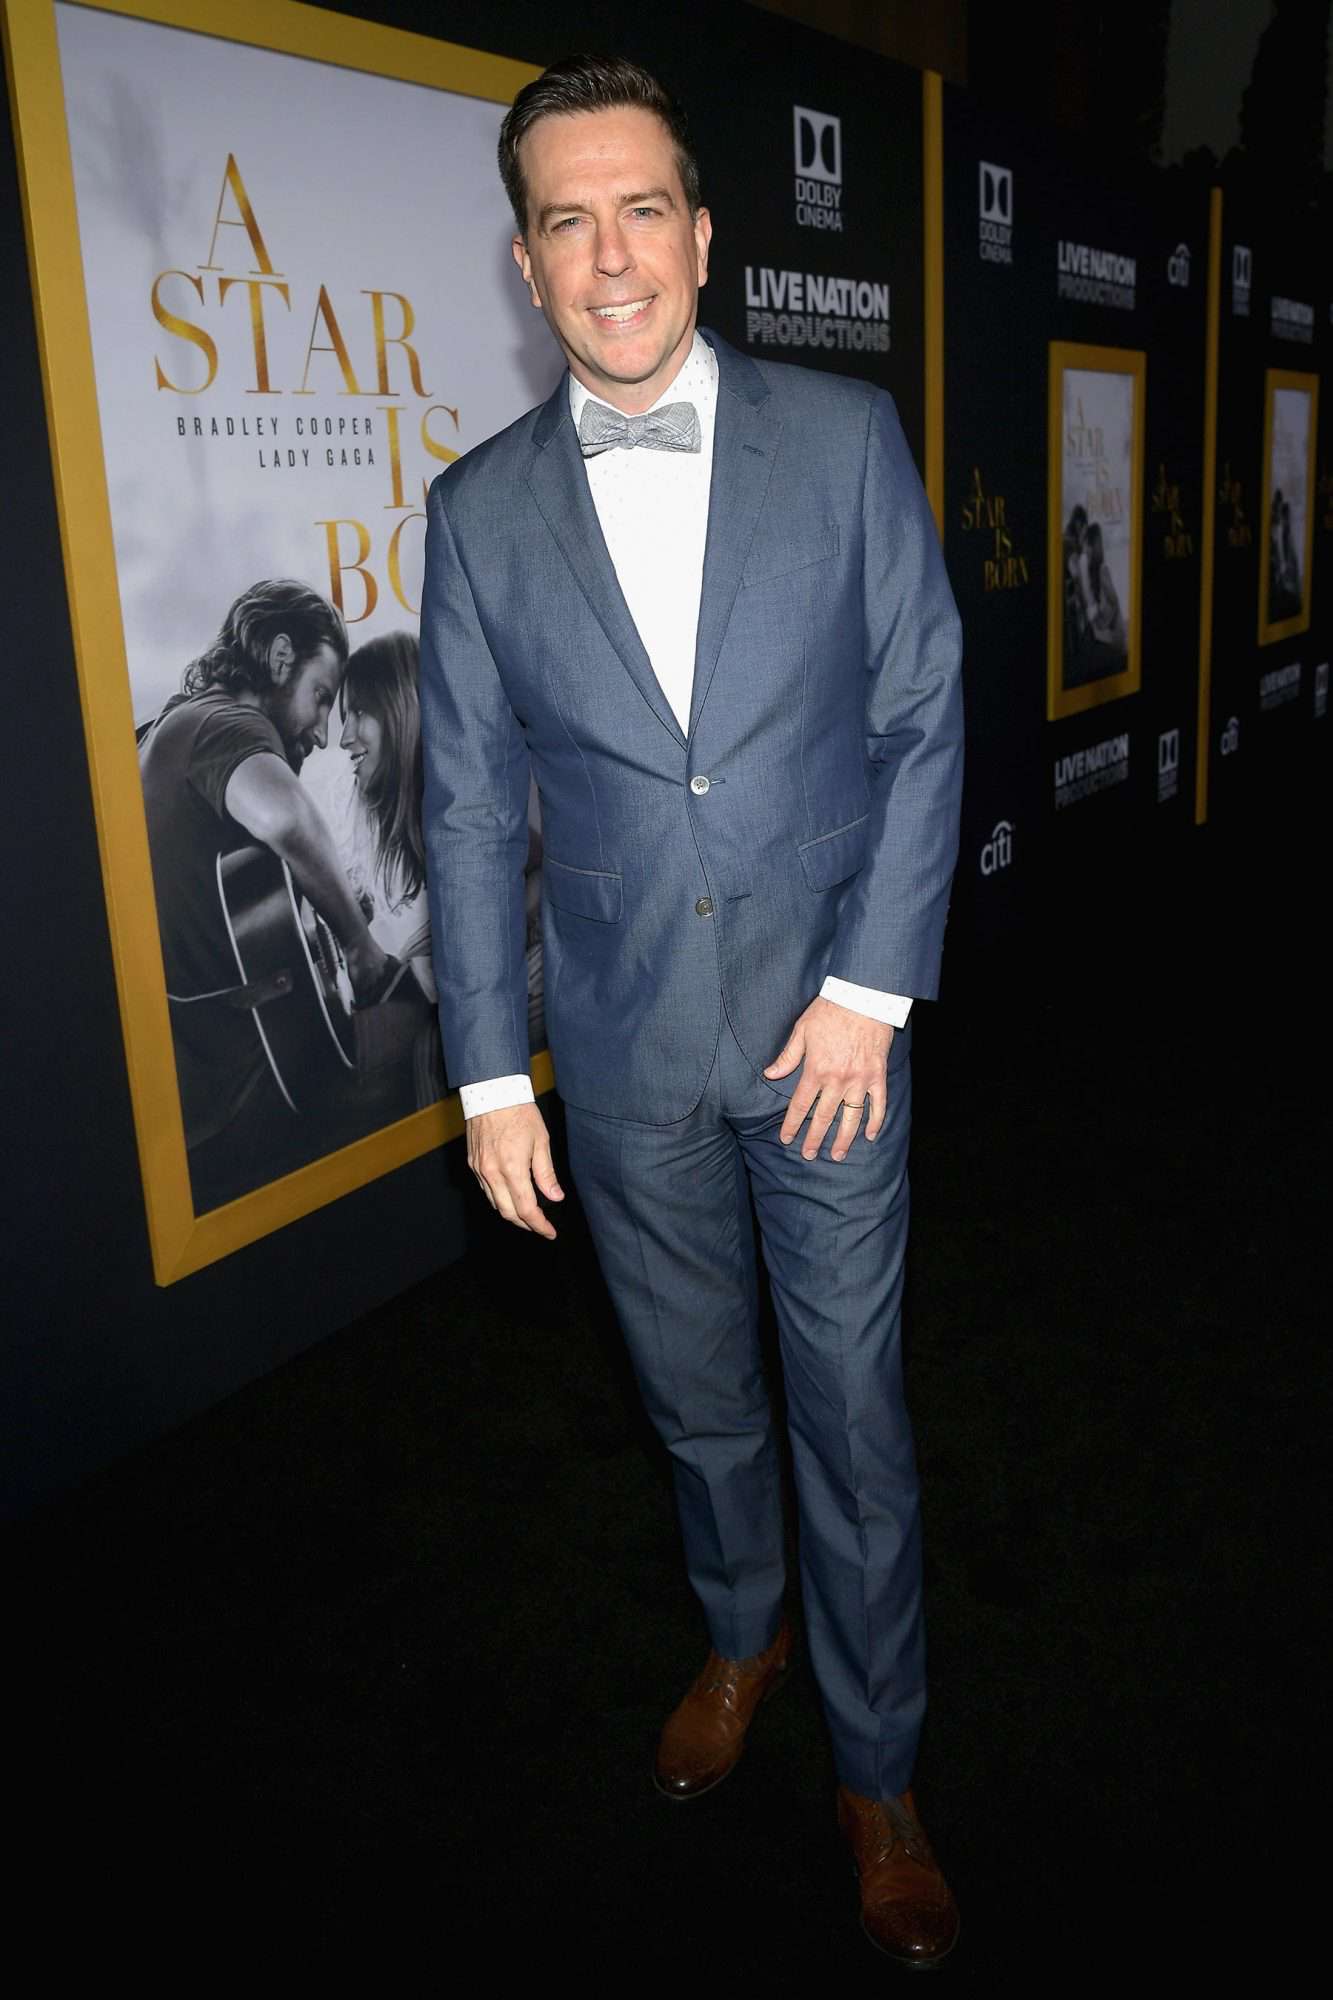 Premiere Of Warner Bros. Pictures' "A Star Is Born" - Red Carpet